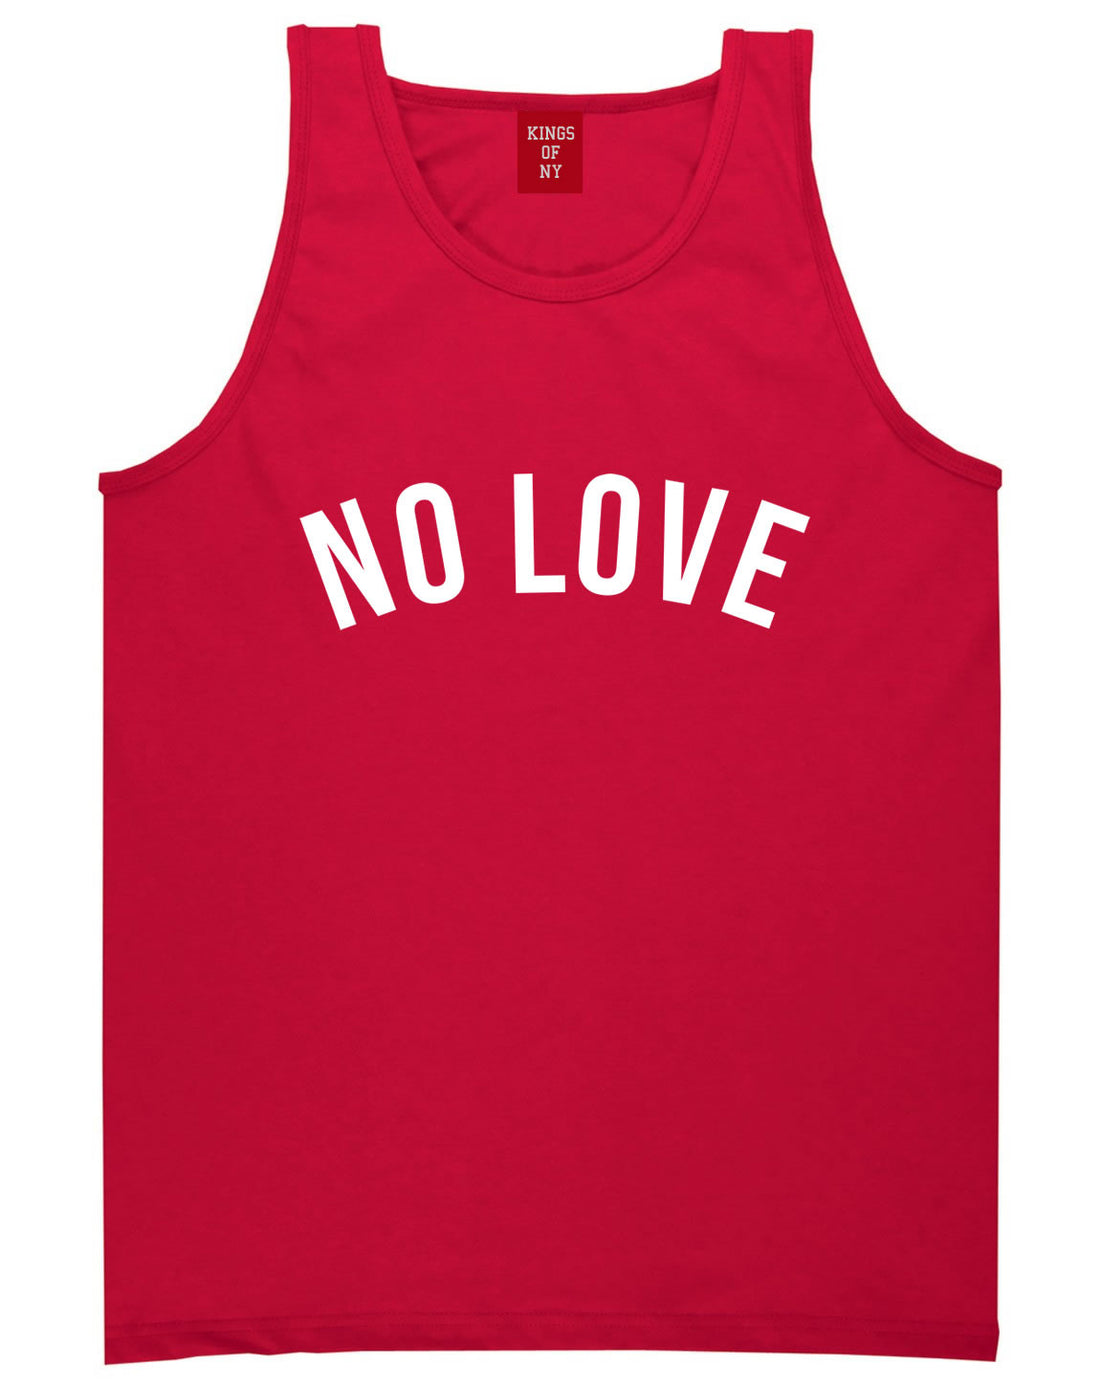 No Love Tank Top in Red by Kings Of NY